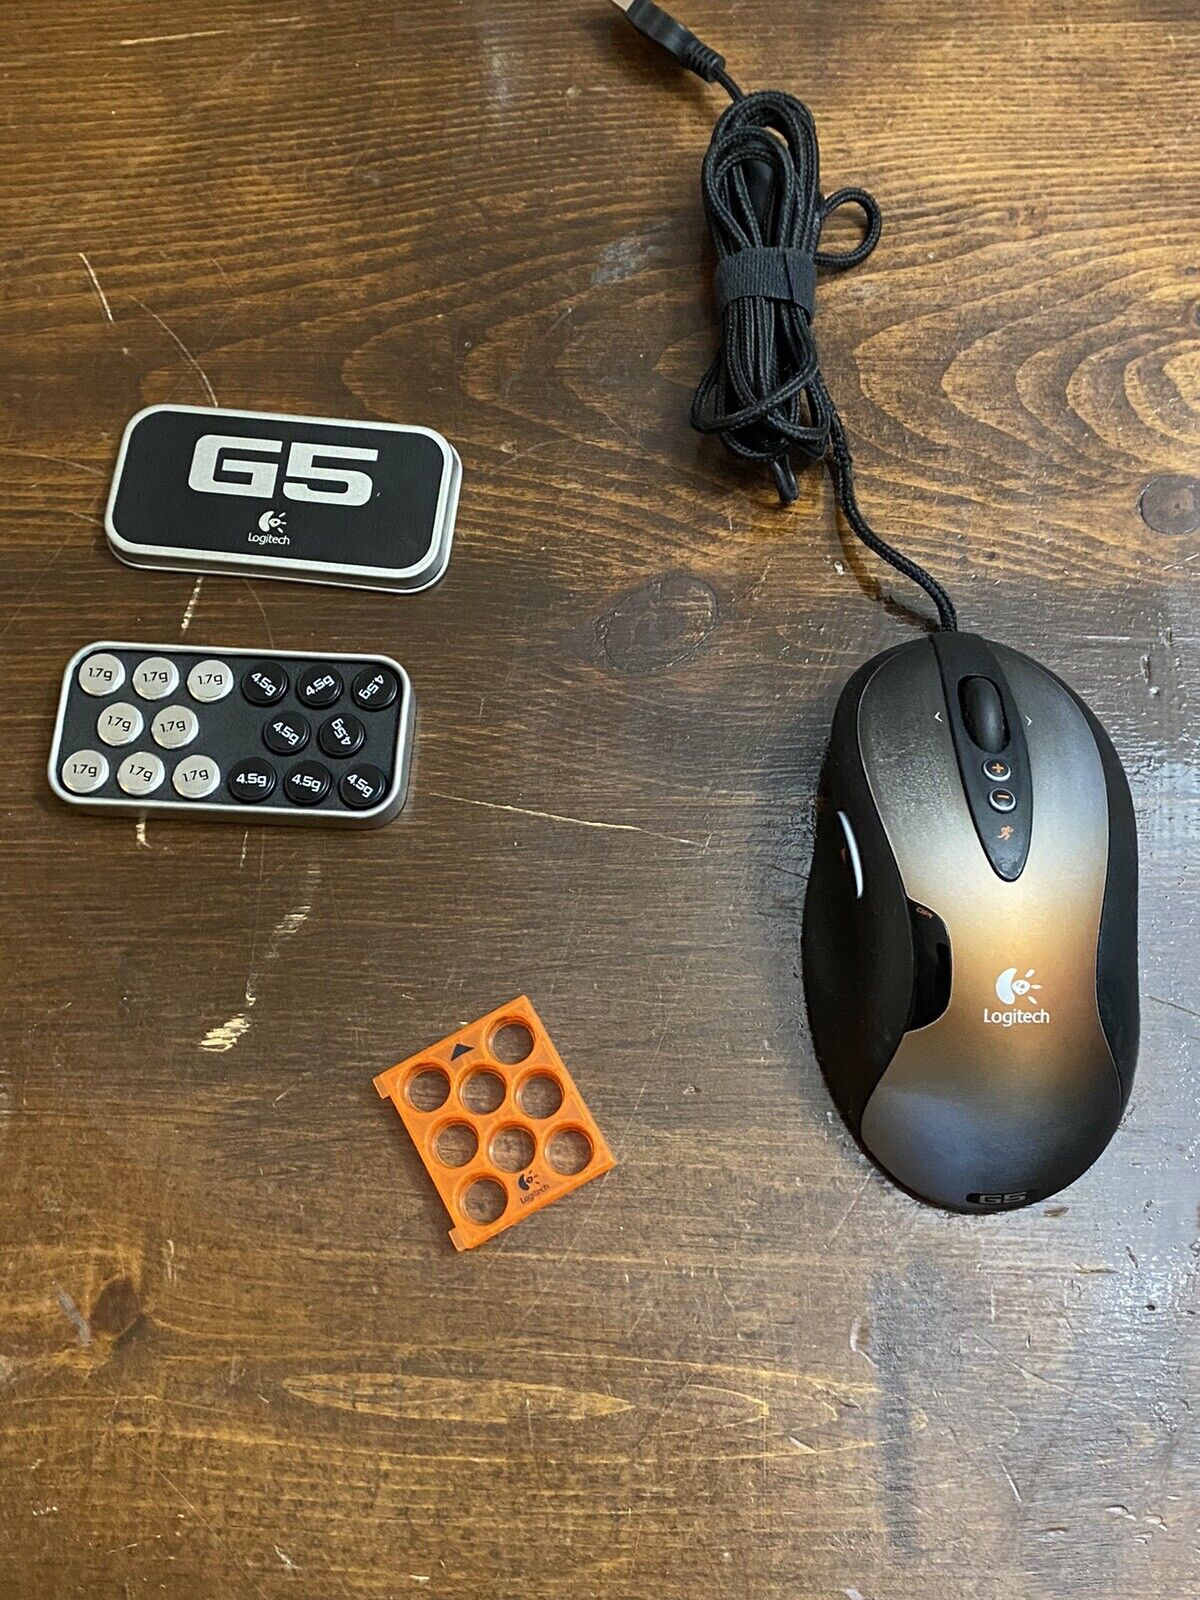 Logitech G5 Laser Gaming Mouse With Full Tuning Weight Set 